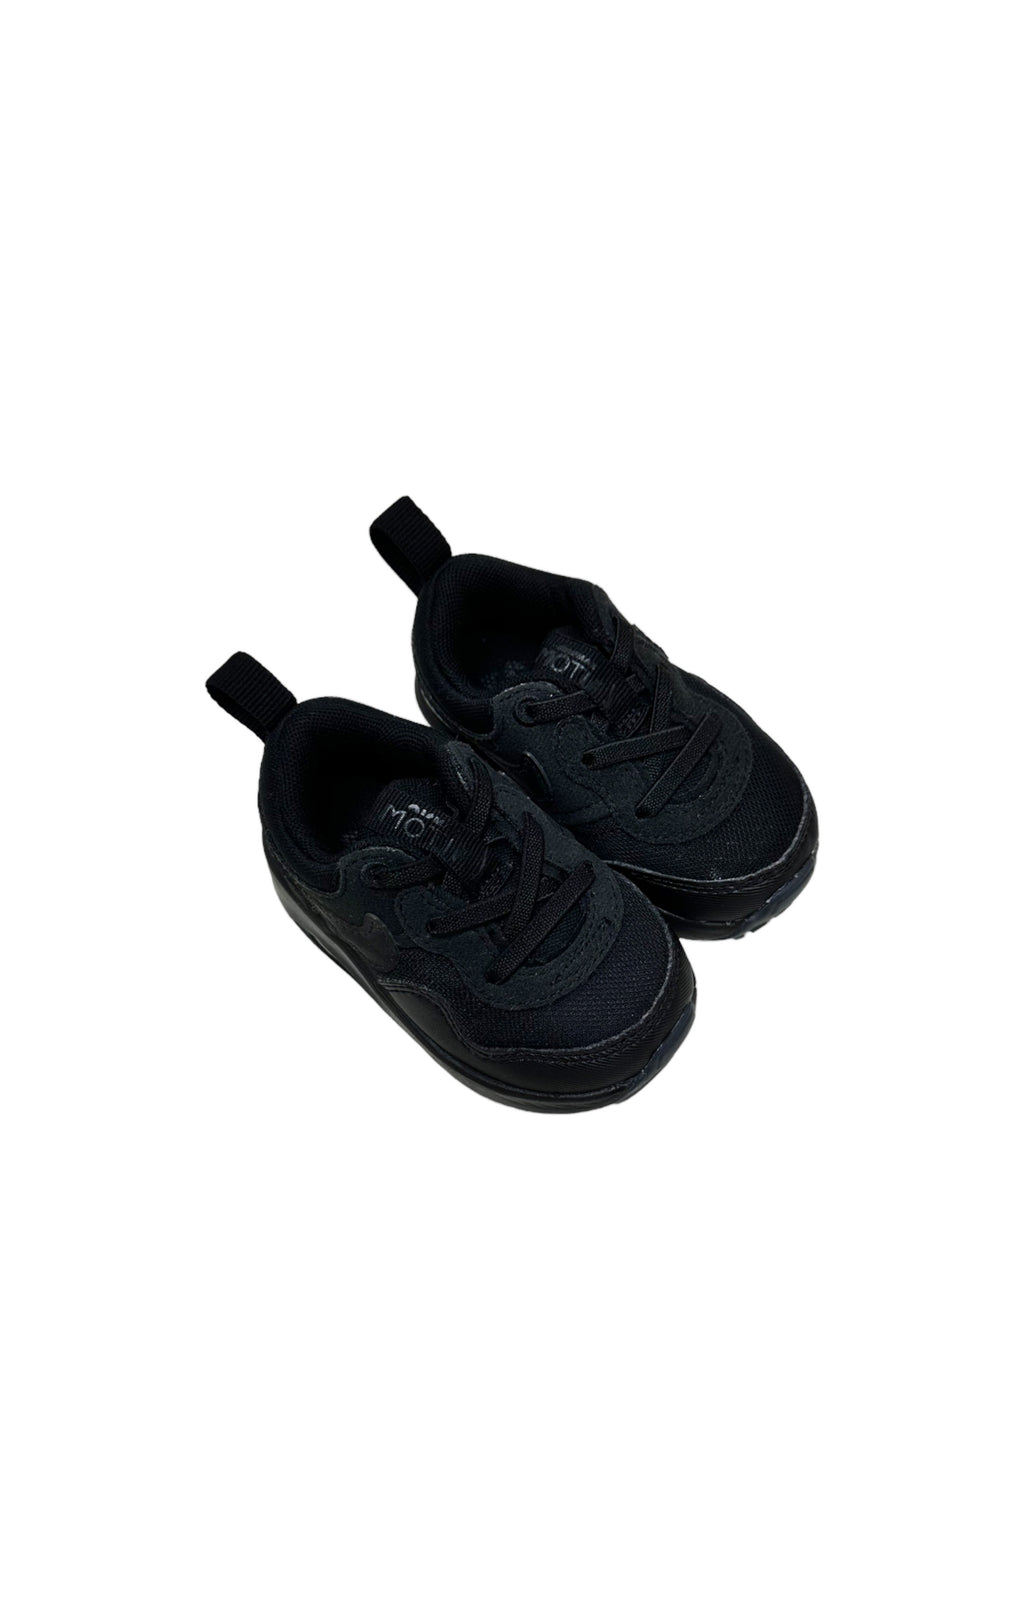 NIKE Sneakers Size: Baby US 4C